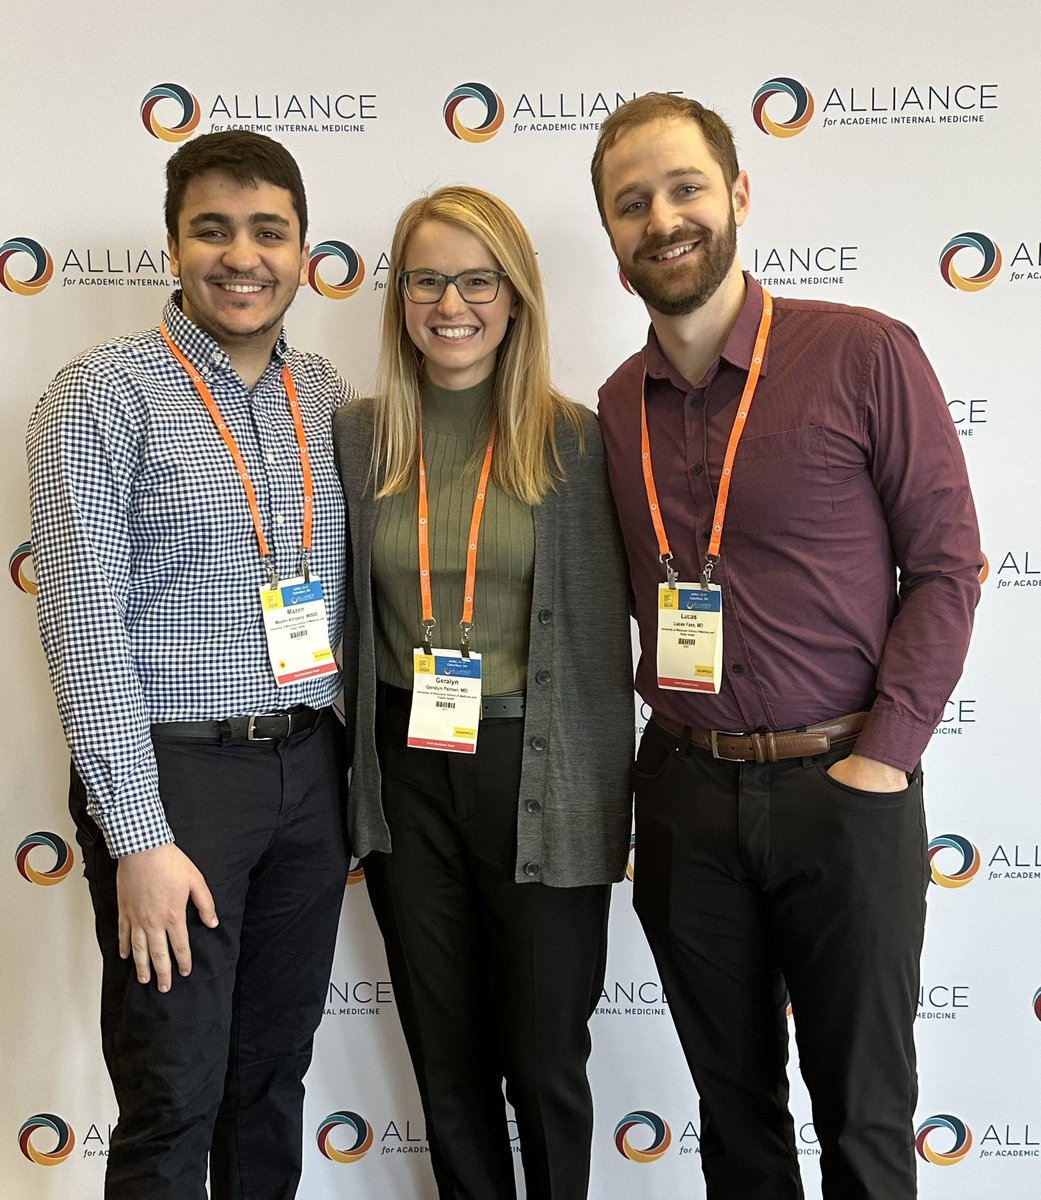 Excited about chief year with these incredible two. Looking forward to a year of growth and mentorship! 

📍Columbus, Ohio  #AIMW24 #Chief_Residents_Track #MedEd #InternalMedicine